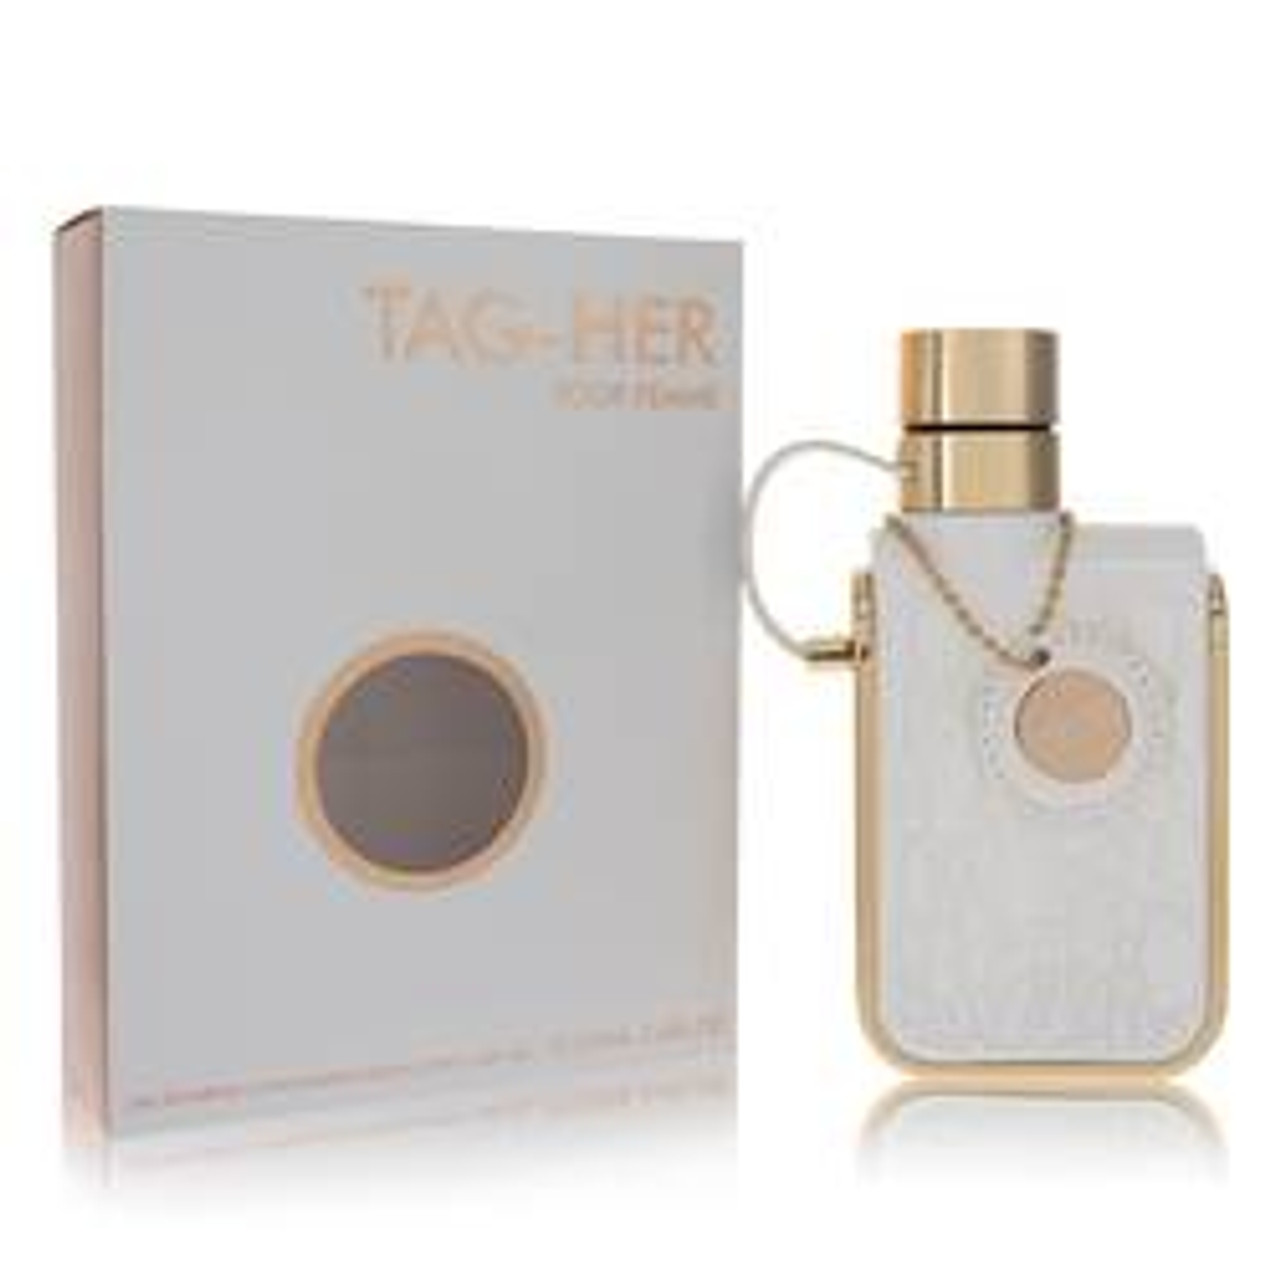 Armaf Tag Her Perfume By Armaf Eau De Parfum Spray 3.4 oz for Women - [From 59.00 - Choose pk Qty ] - *Ships from Miami